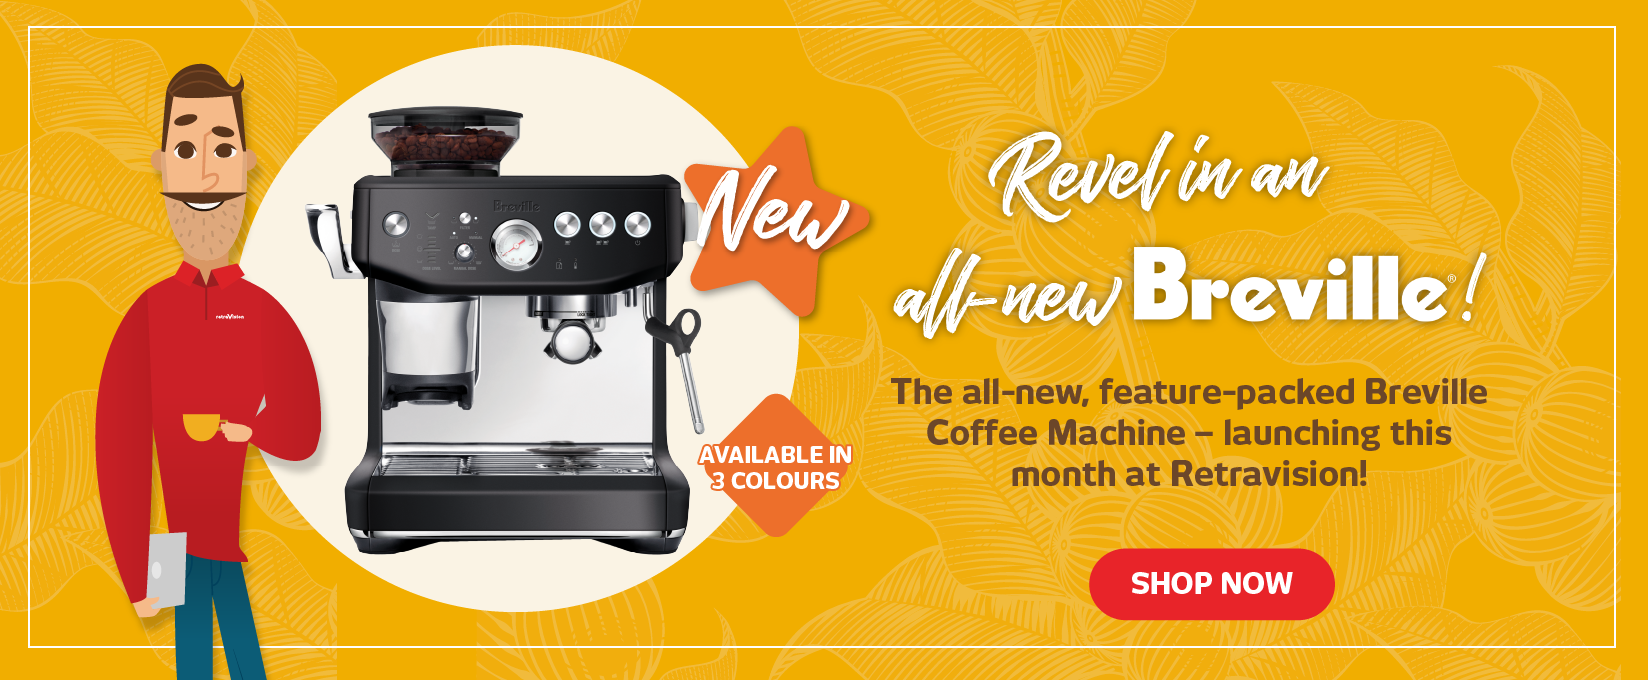 The All-New Breville Barista Express Impress - Now Available! at Retravision